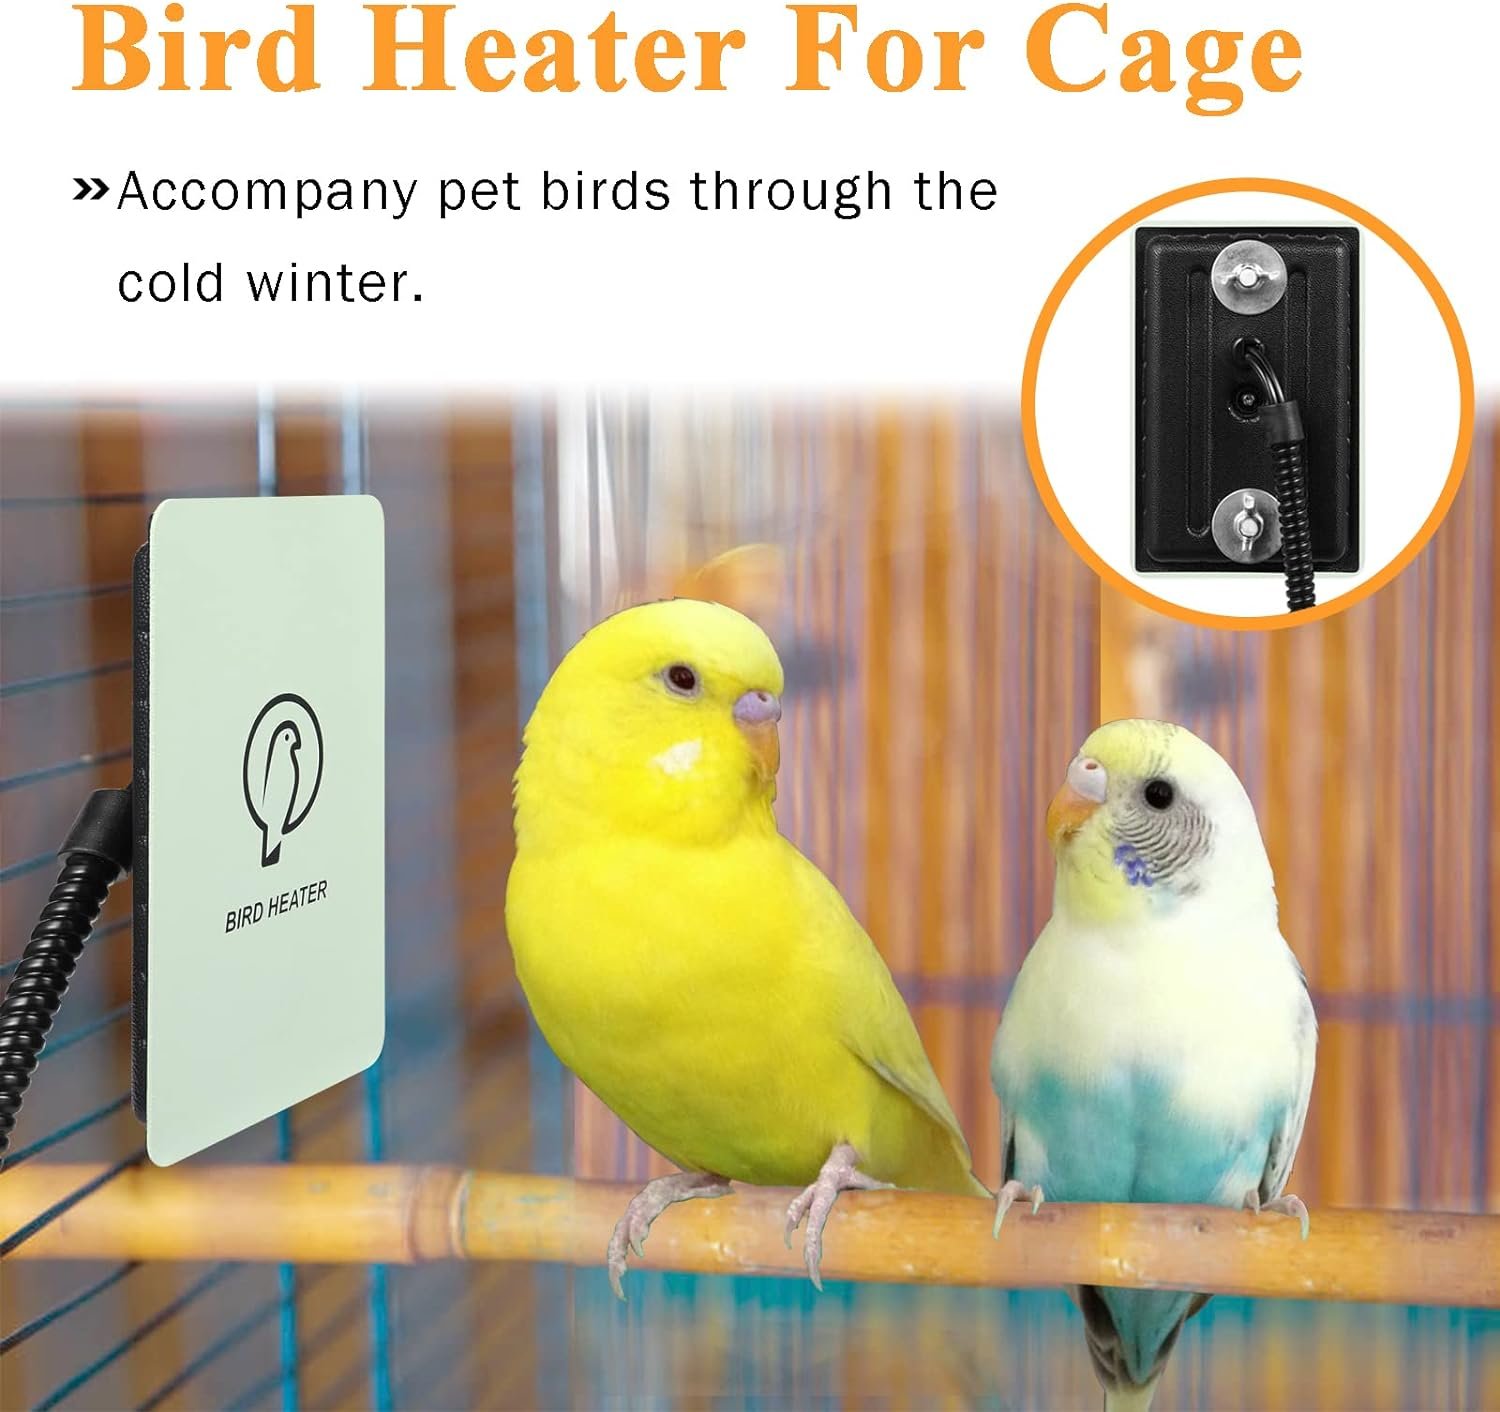 Kokopro Bird Heater for Cage - Snuggle Up Bird Warmer for Exotic Pet Birds, 10W African Grey, Parakeets, Parrots, (3.7x5.7)